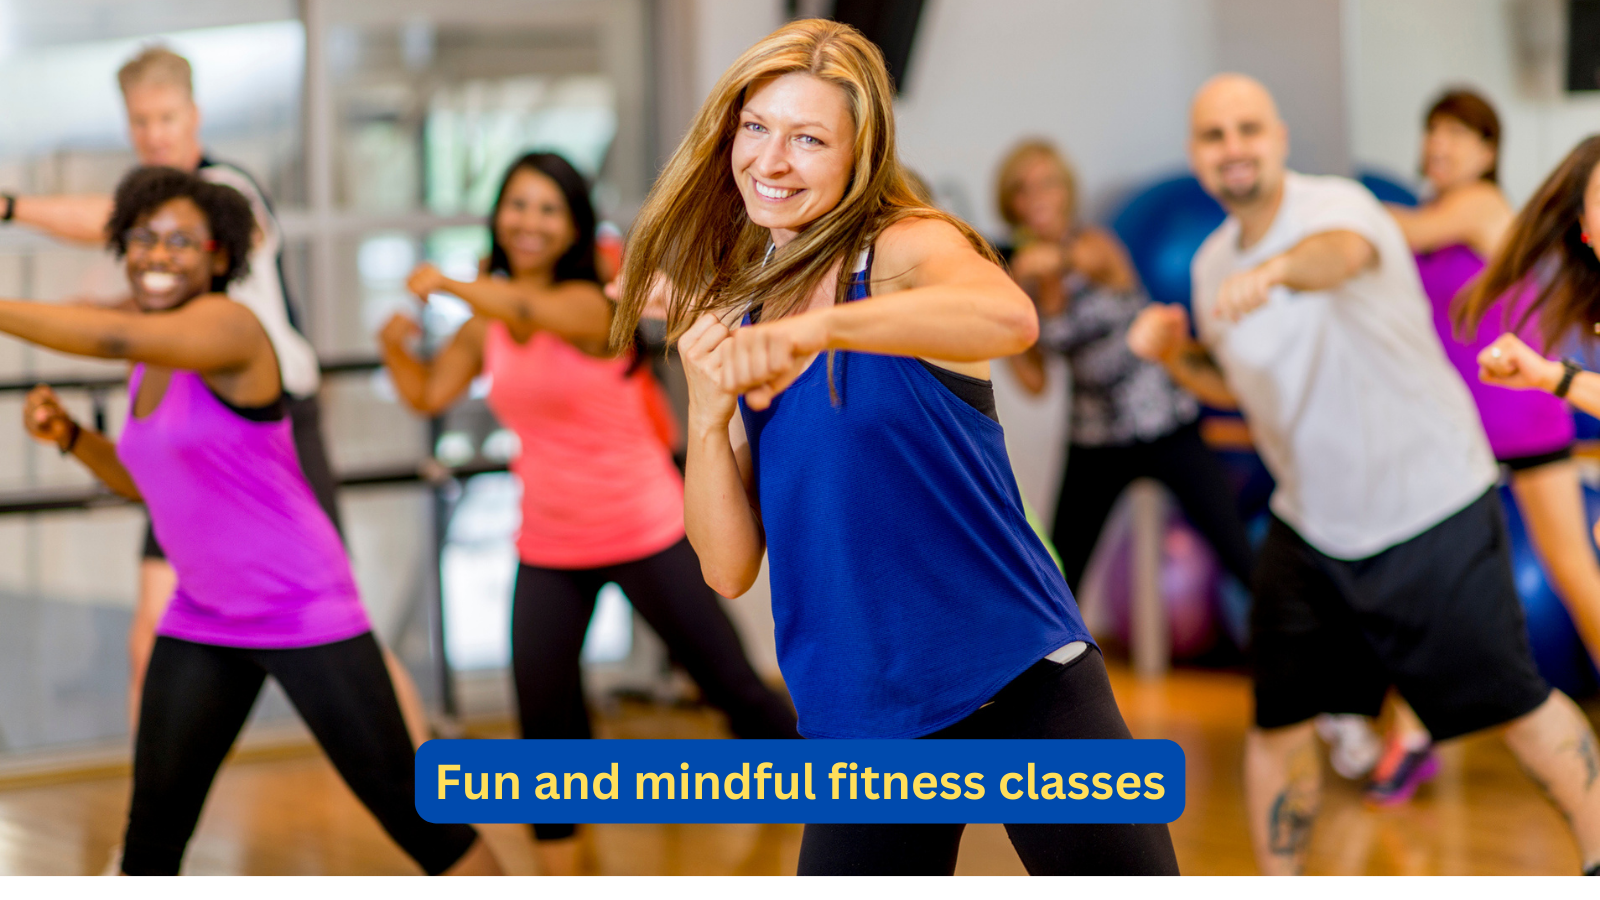 Fun and mindful fitness classes